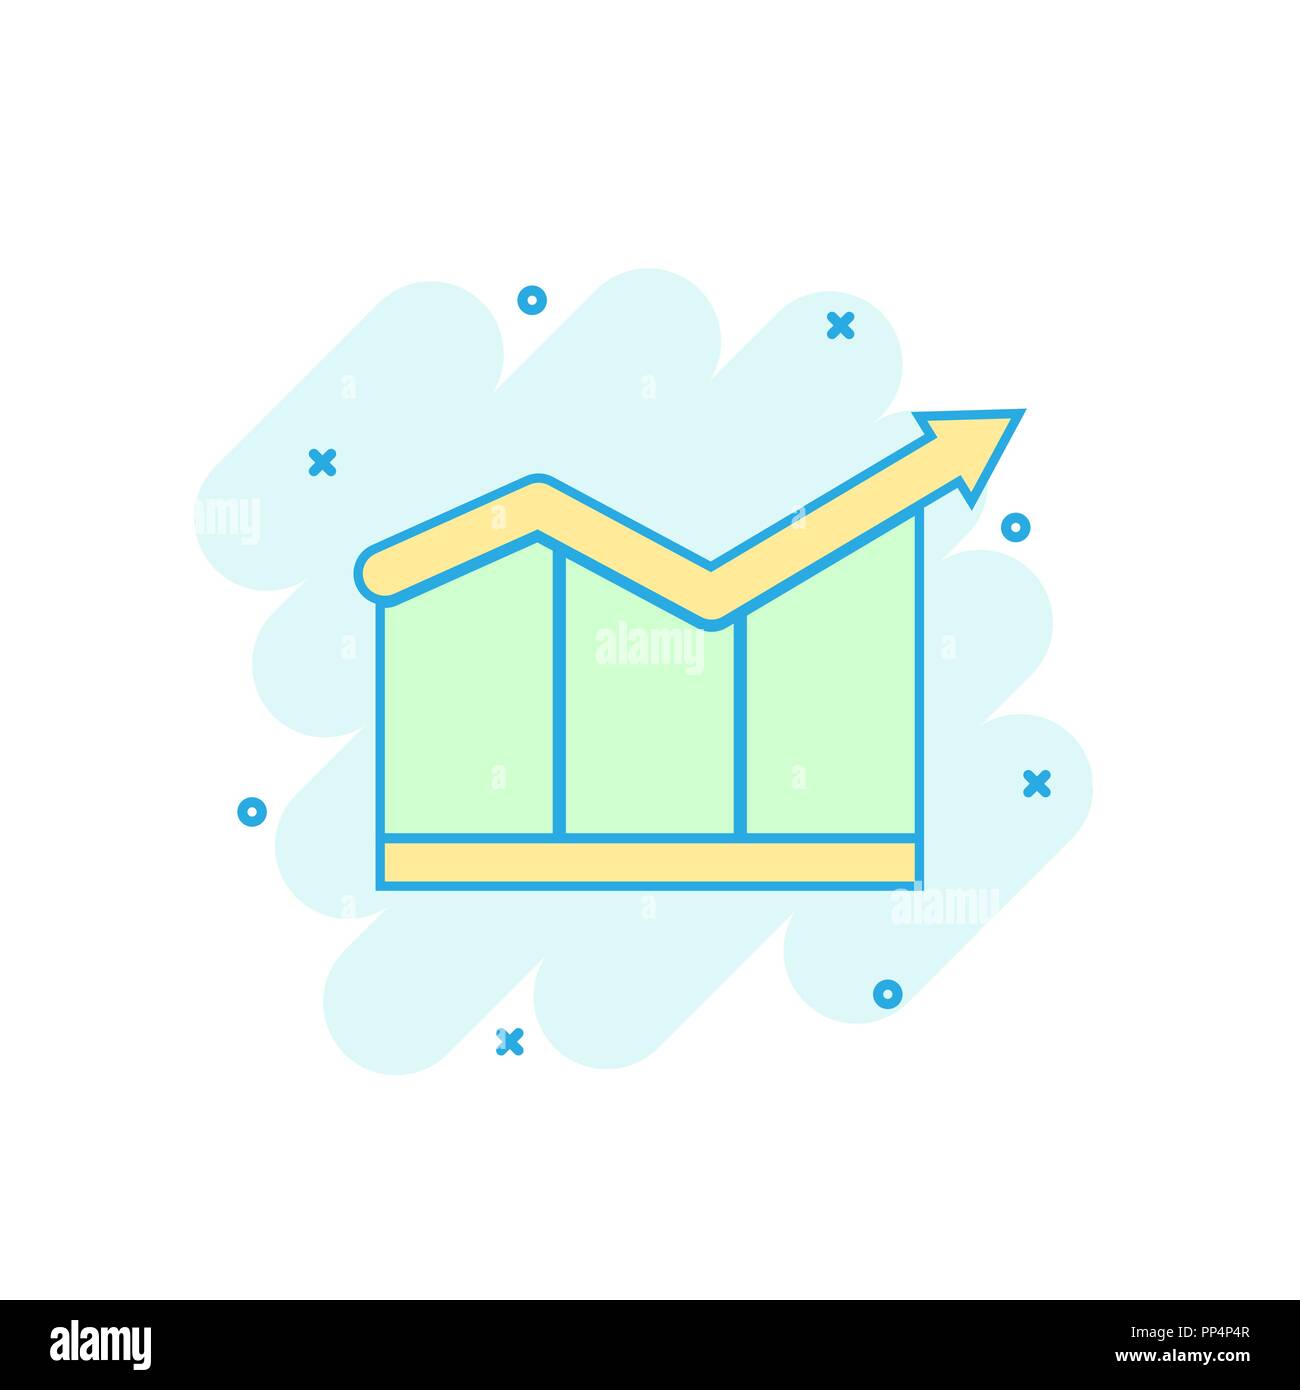 Cartoon Colored Chart Growth Icon In Comic Style Graph Sign Illustration Pictogram Diagram Splash Business Concept Stock Vector Image Art Alamy Businessman and graph data cartoon stock vector. https www alamy com cartoon colored chart growth icon in comic style graph sign illustration pictogram diagram splash business concept image220152039 html